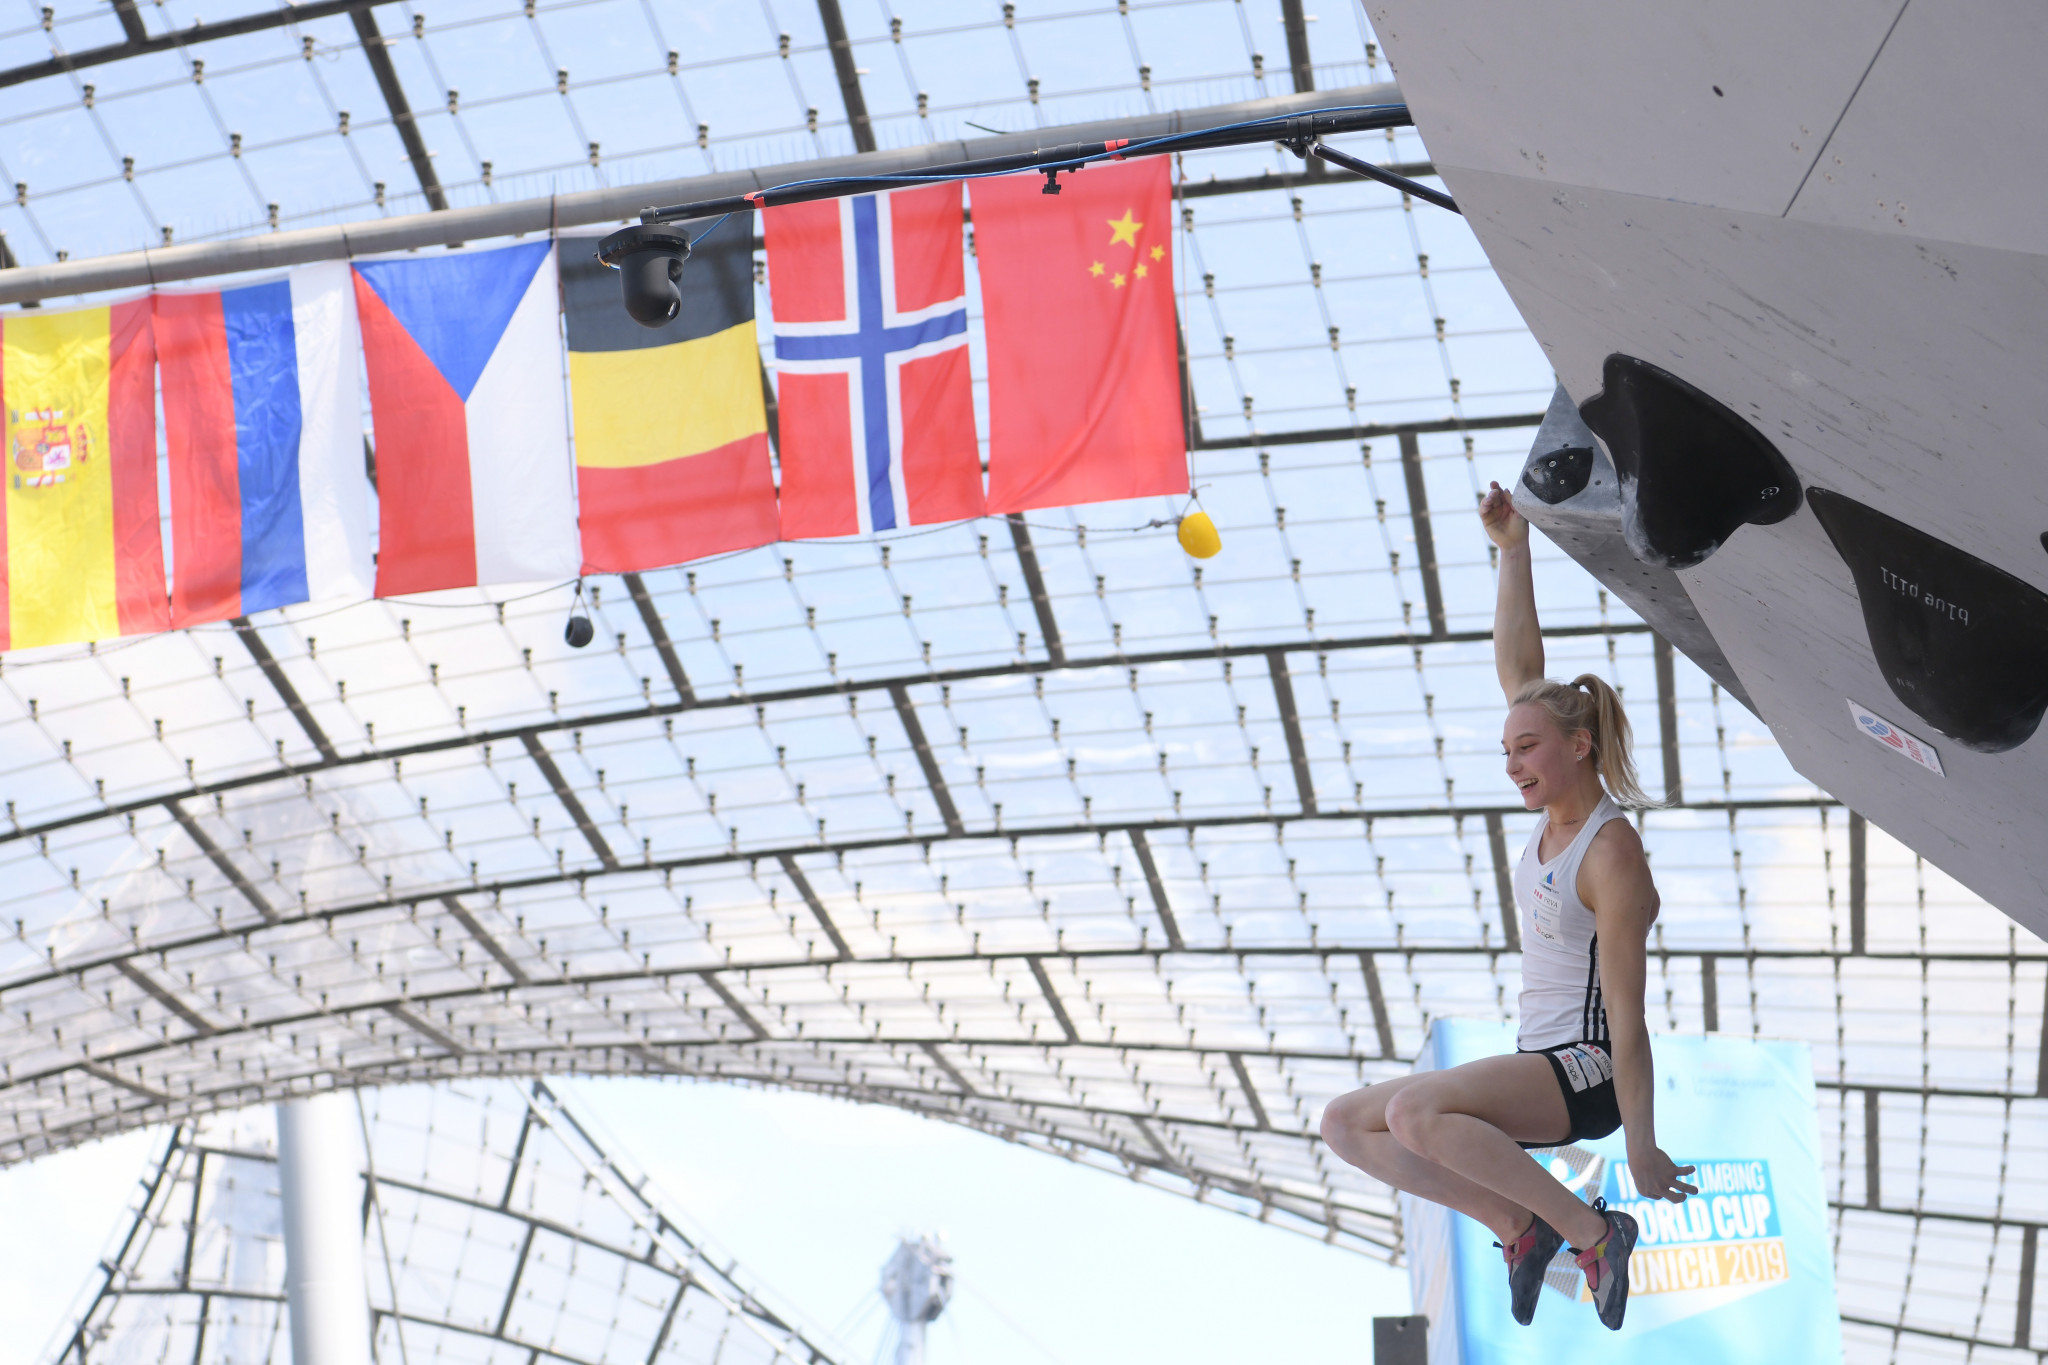 World champion Janja Garnbret of Slovenia continued her 100 per cent record so far this season in Munich ©Getty Images